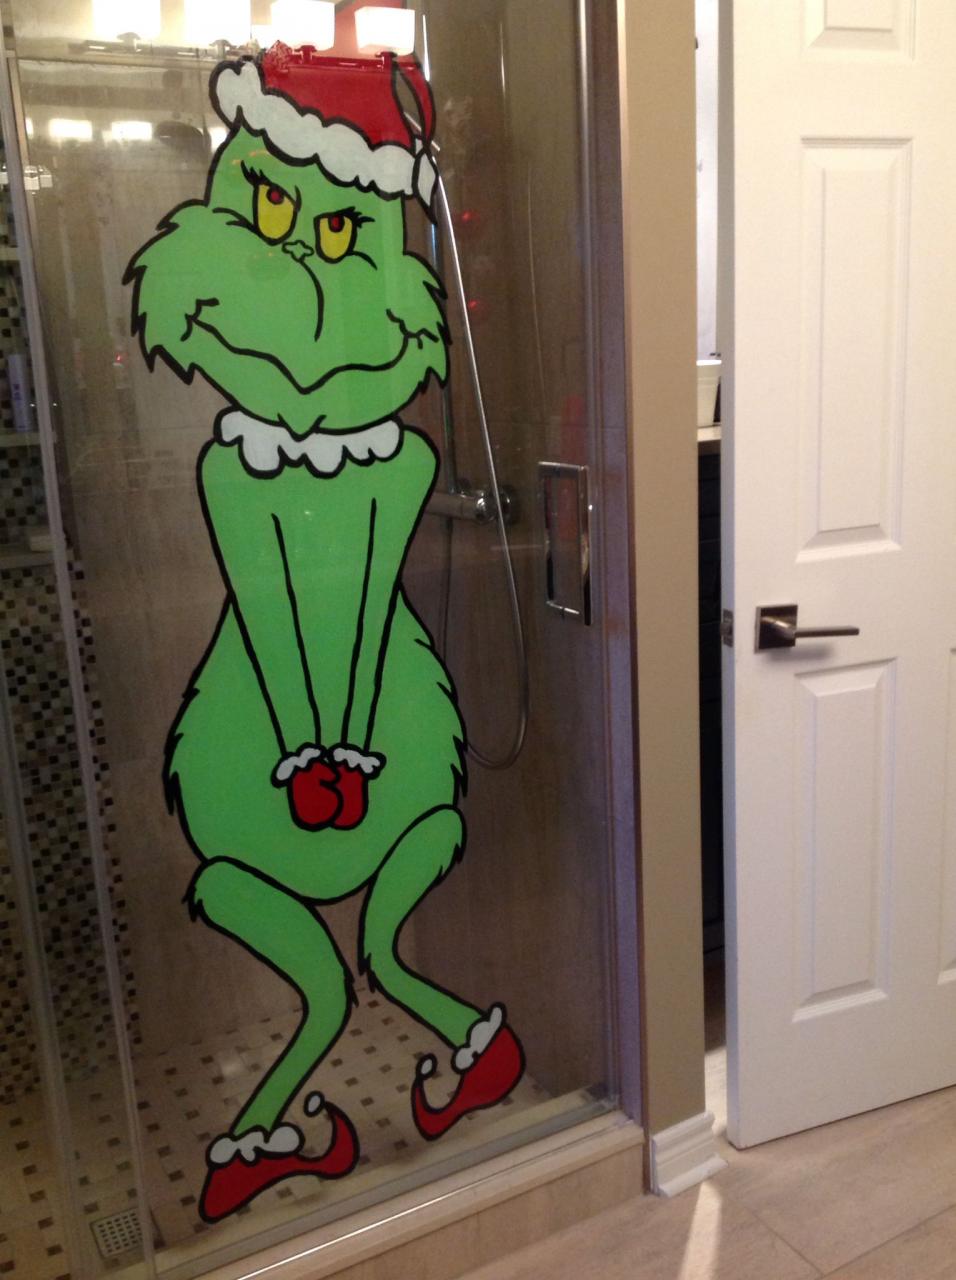 Favourite part of the grinch bathroom? My friend Shirley painted the